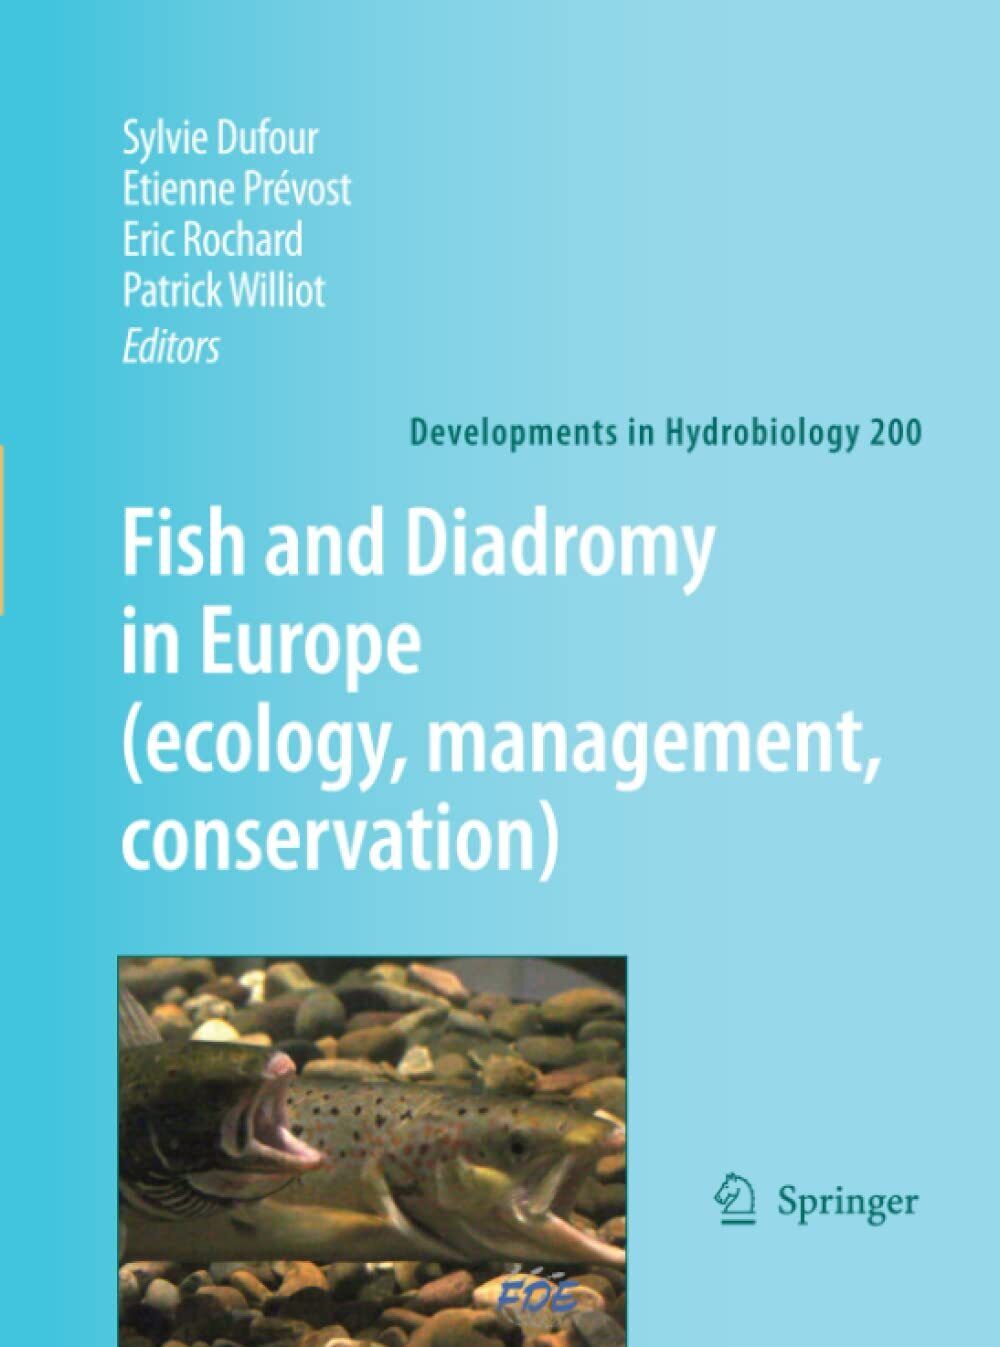 Fish and Diadromy in Europe (ecology, management, conservation) - Springer, 2010